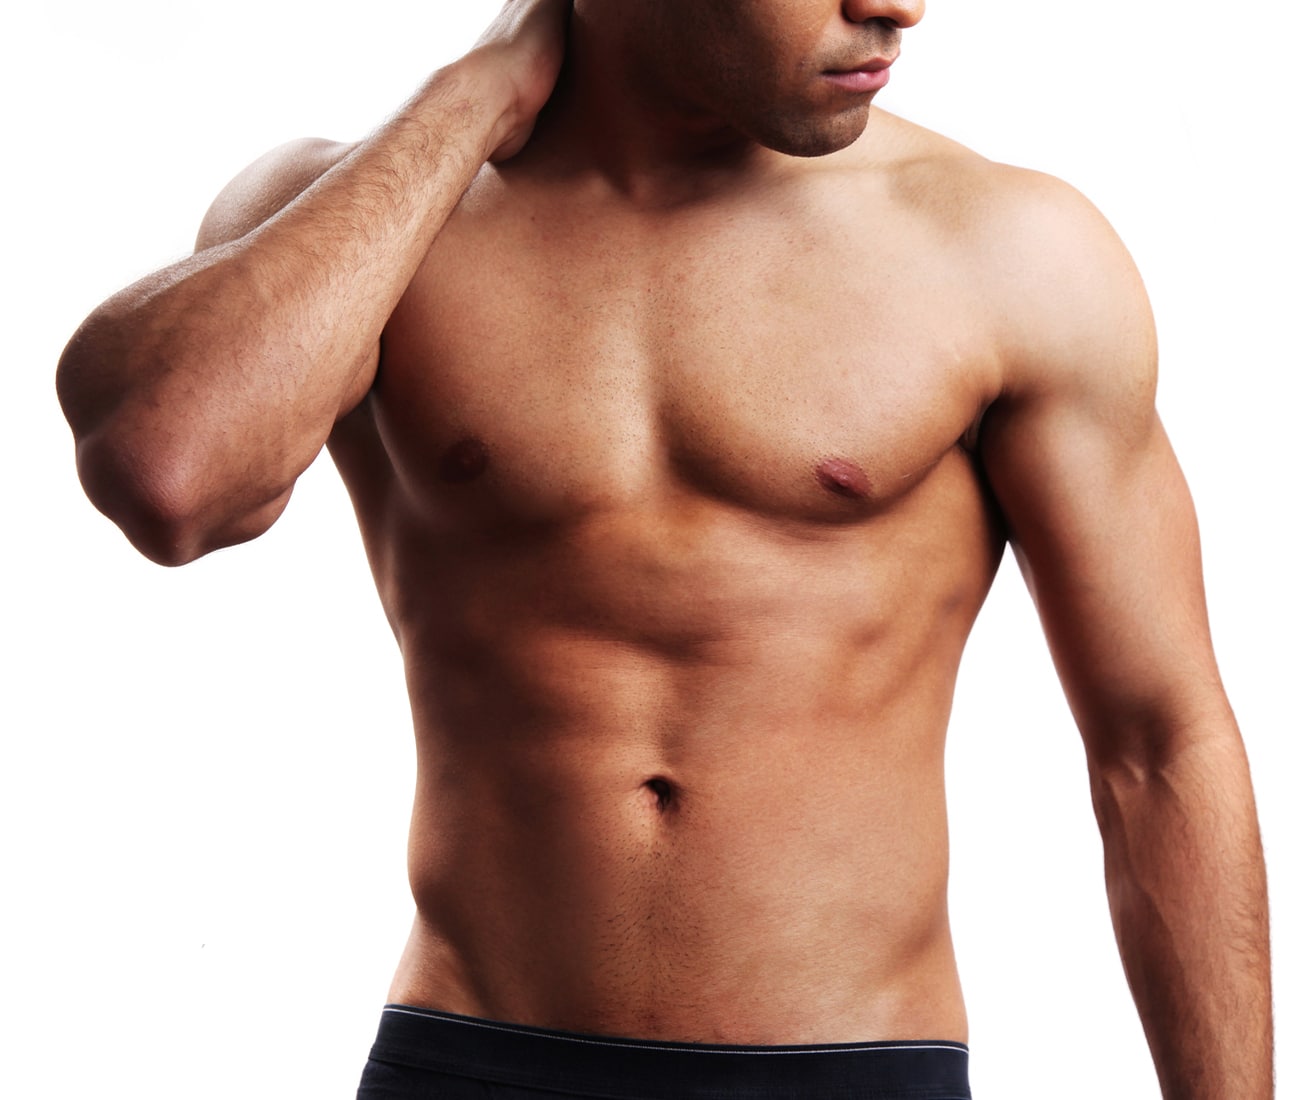 Man Posing For Camera Showing Off Bodysculpting